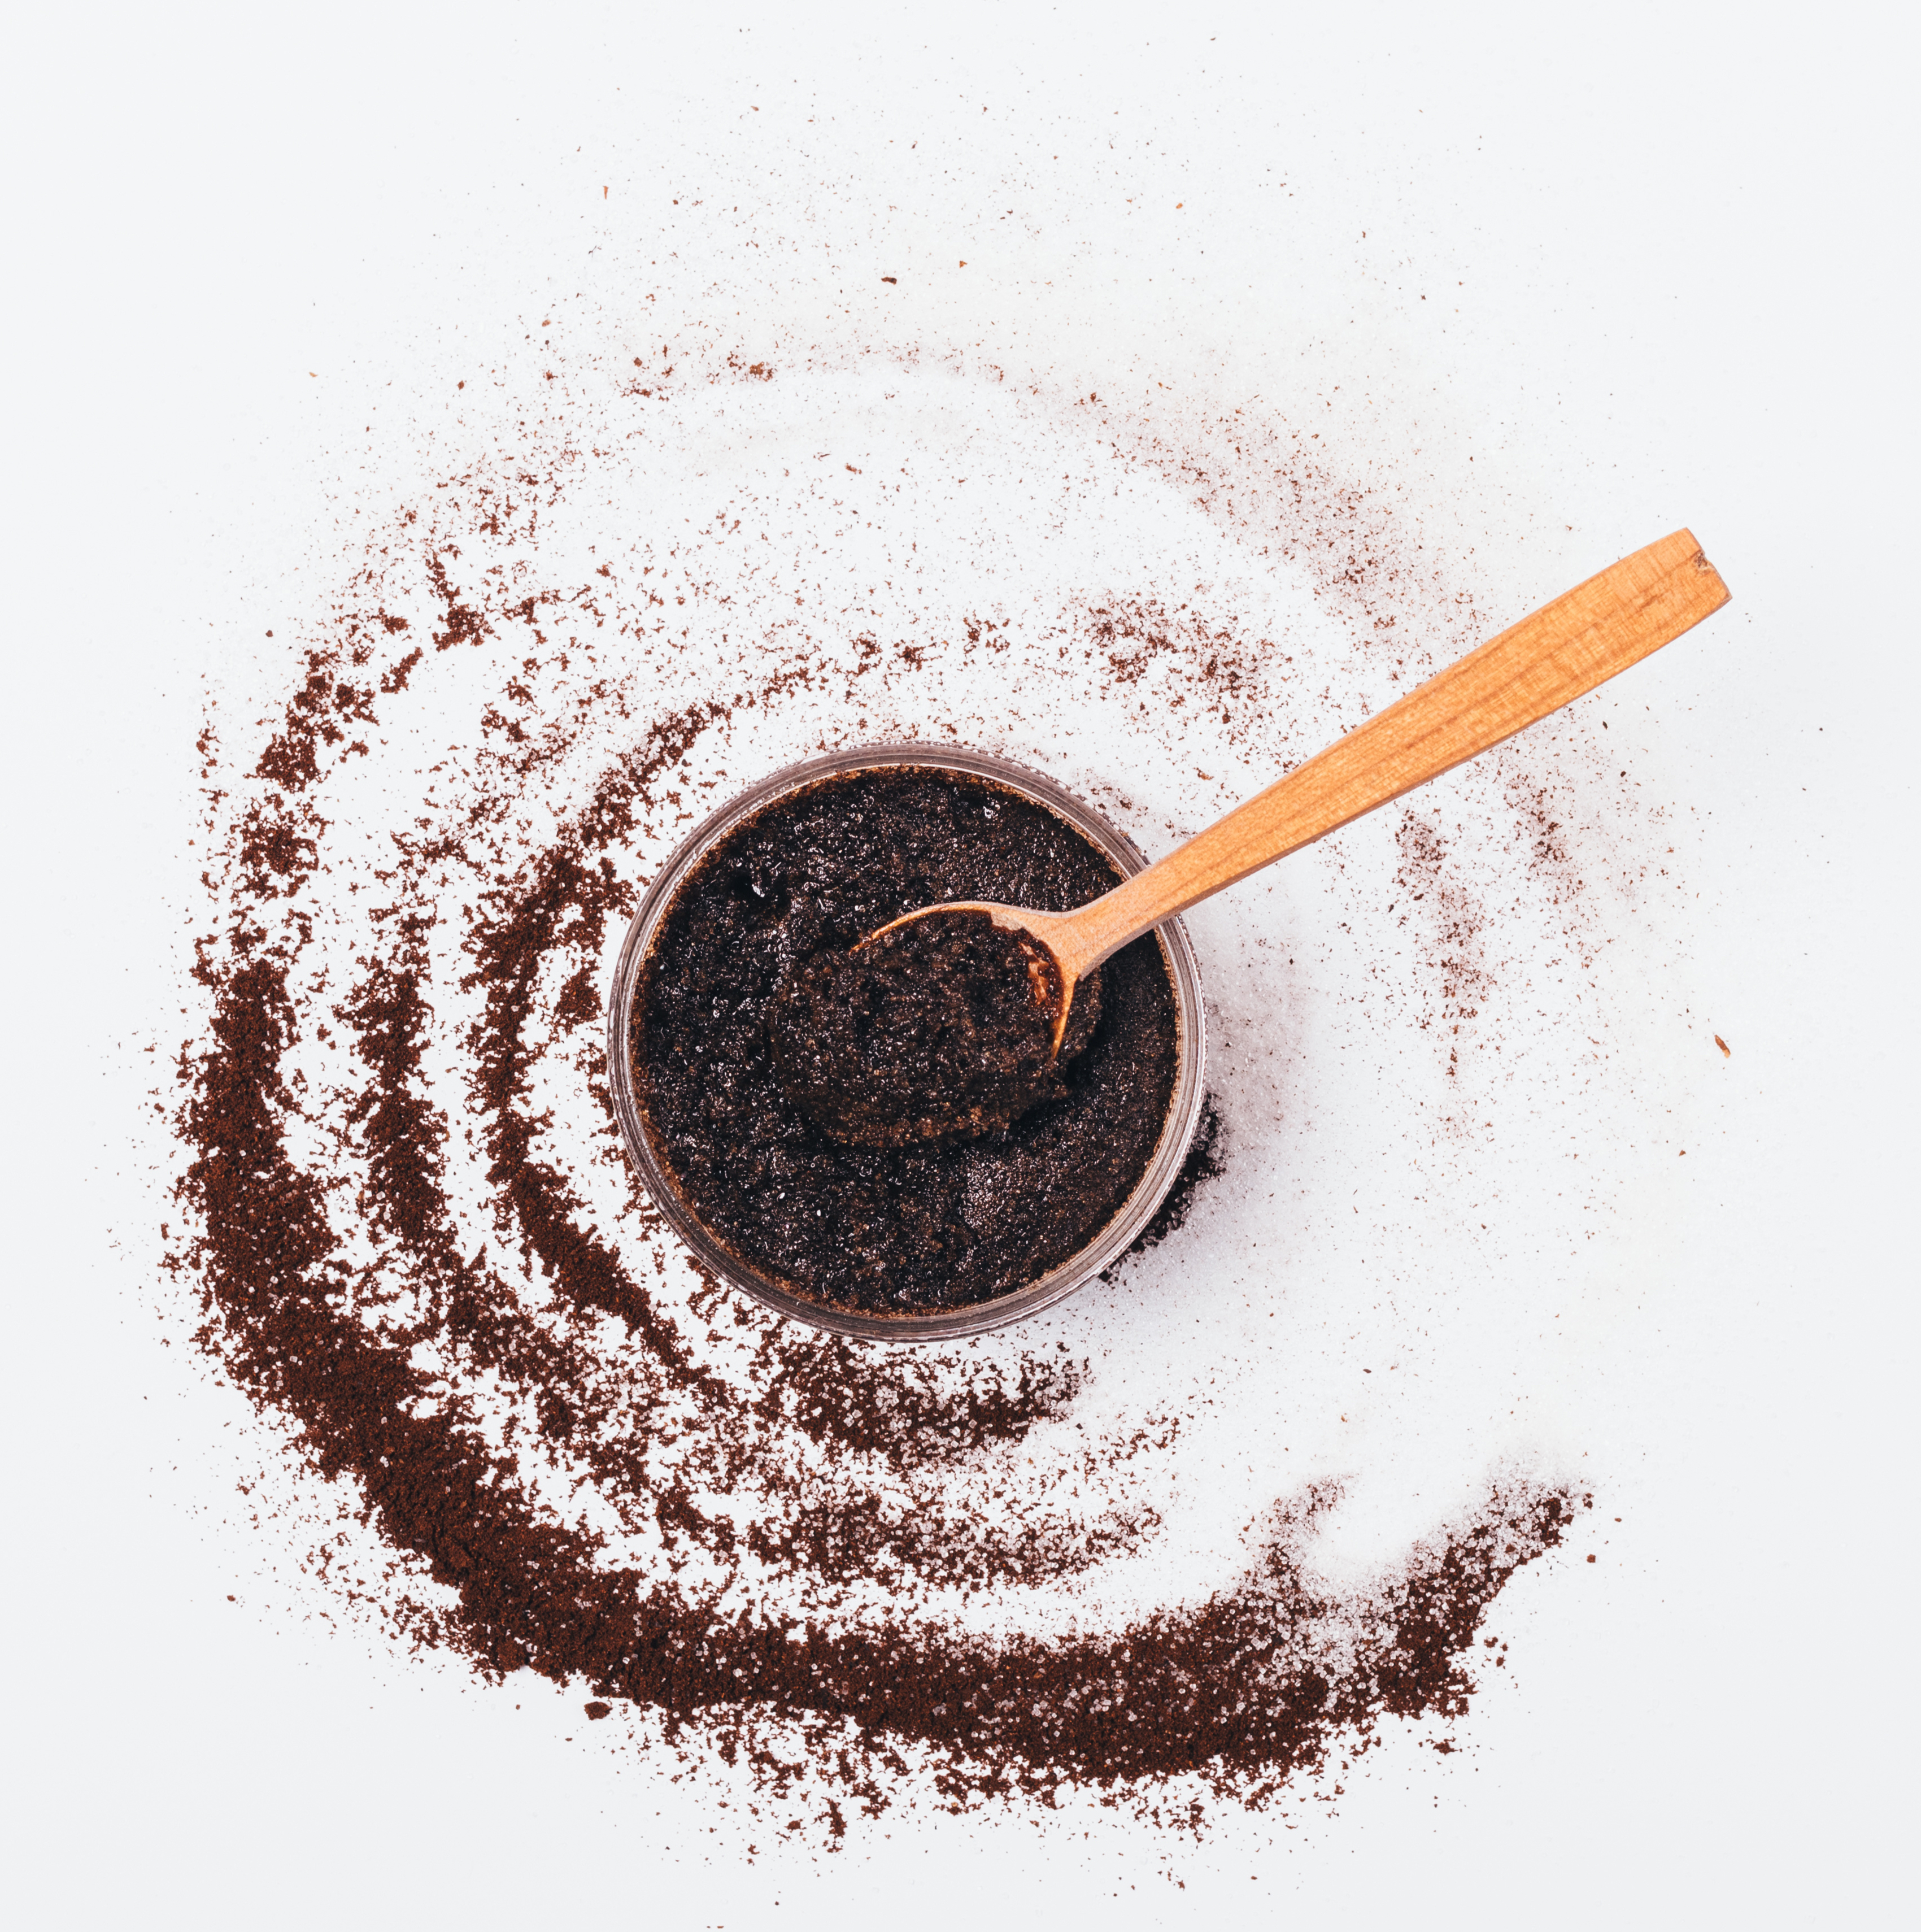 The picture shows a cup with spoon and coffee grounds